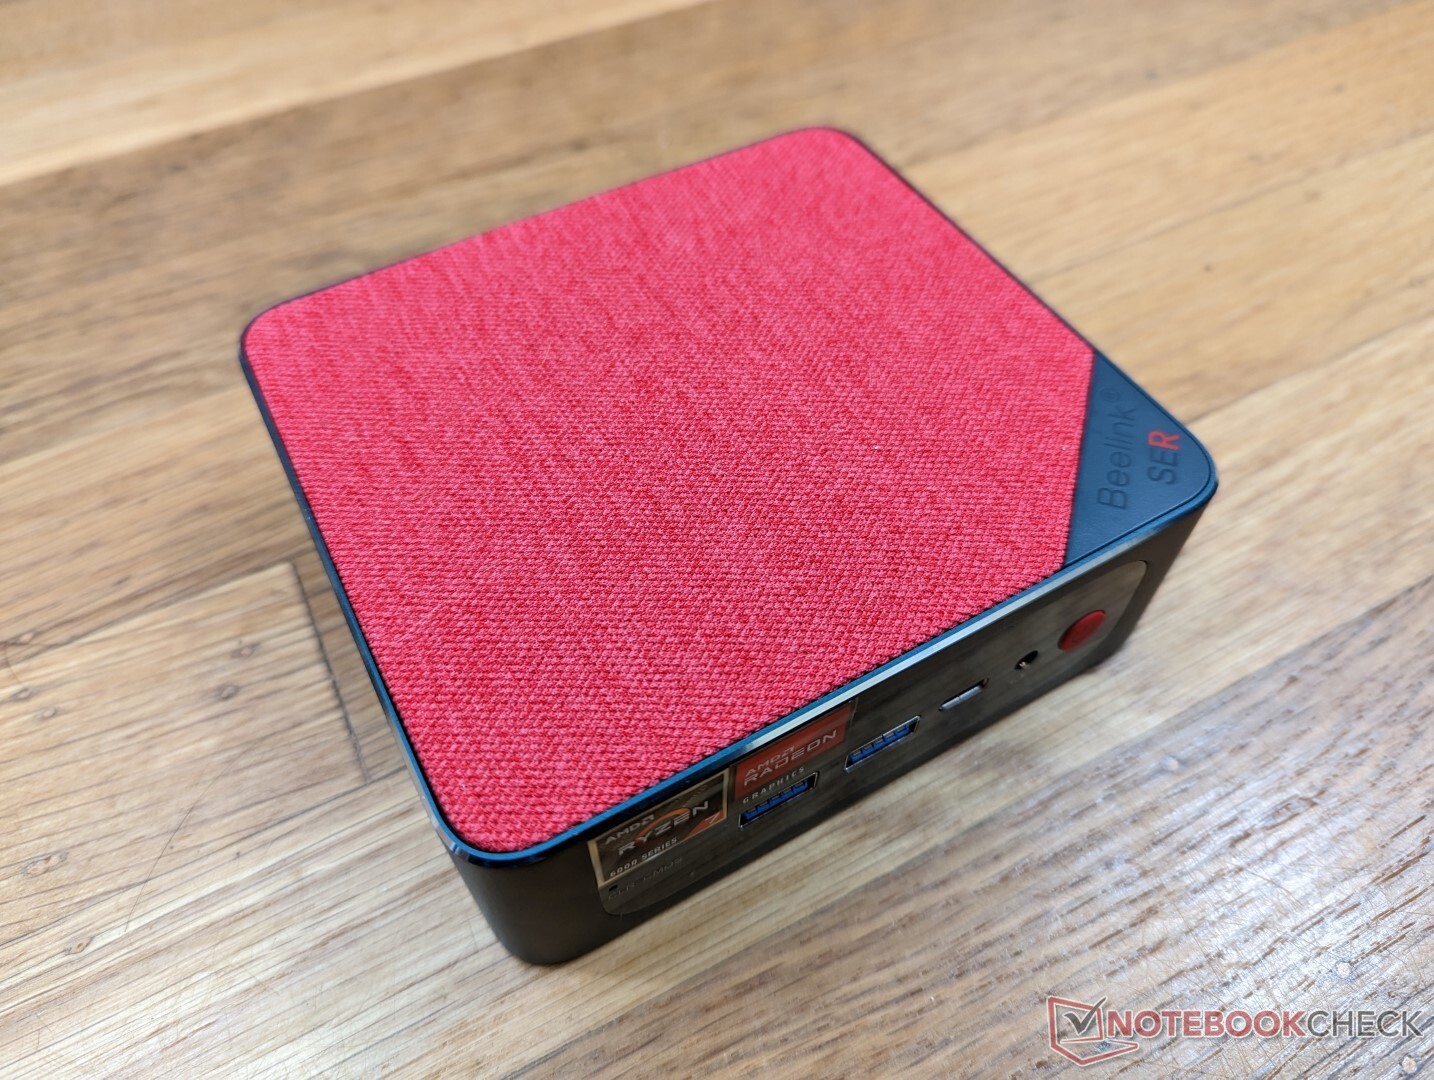 Beelink SER6 MAX Mini PC Review - Great Performance in a small form factor  